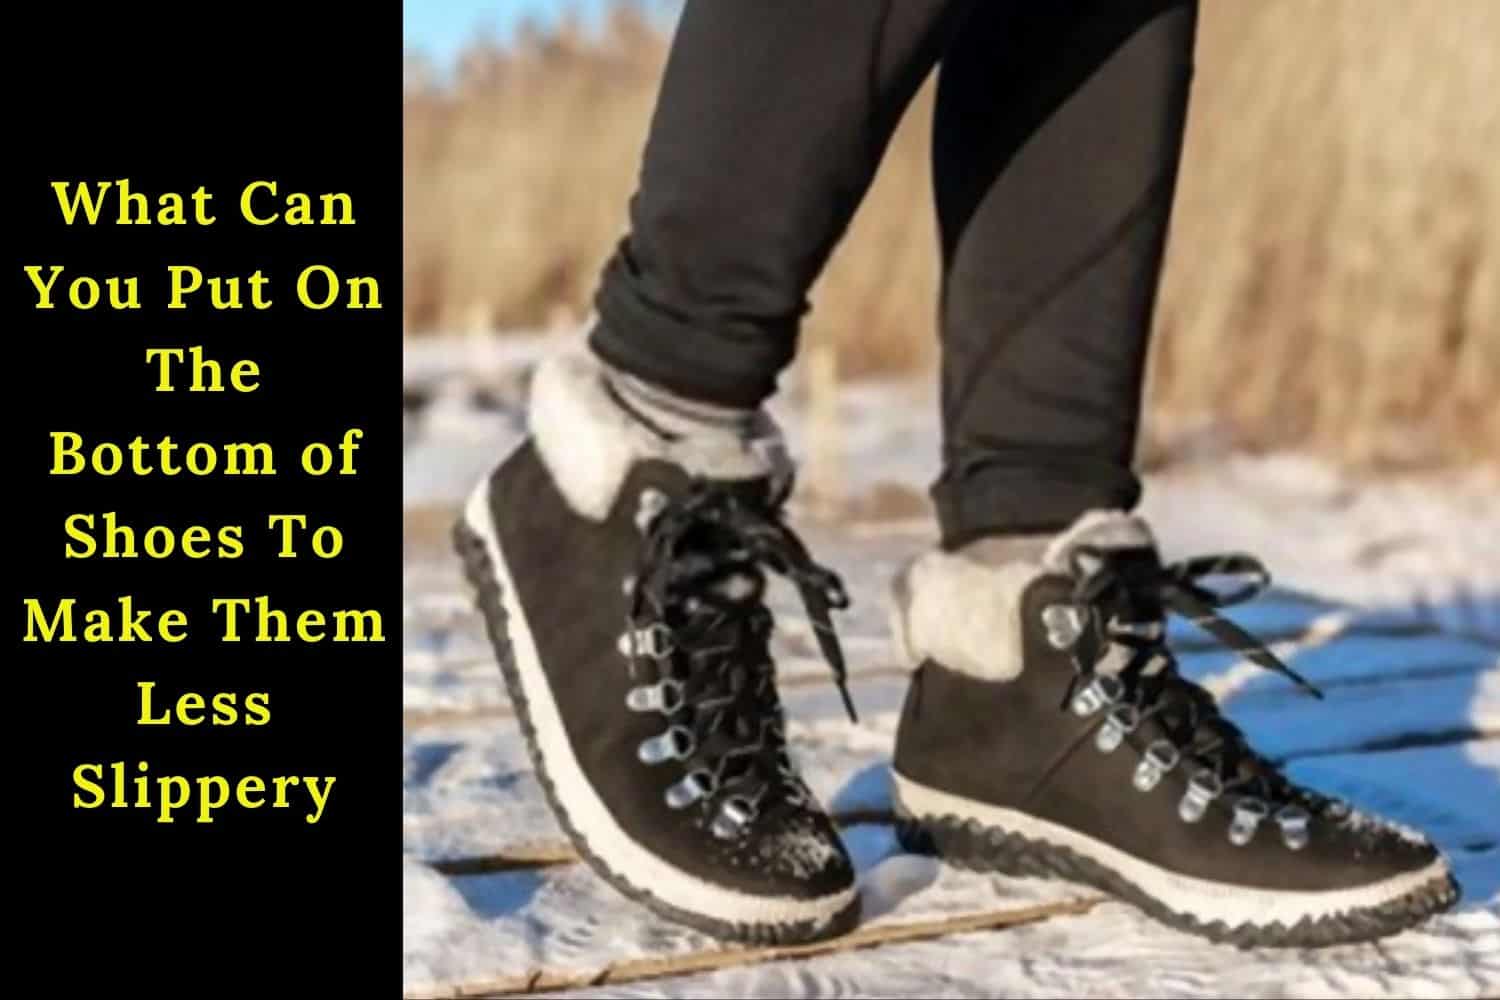 Guide What Can You Put On The Bottom of Shoes to Make Them Less Slippery